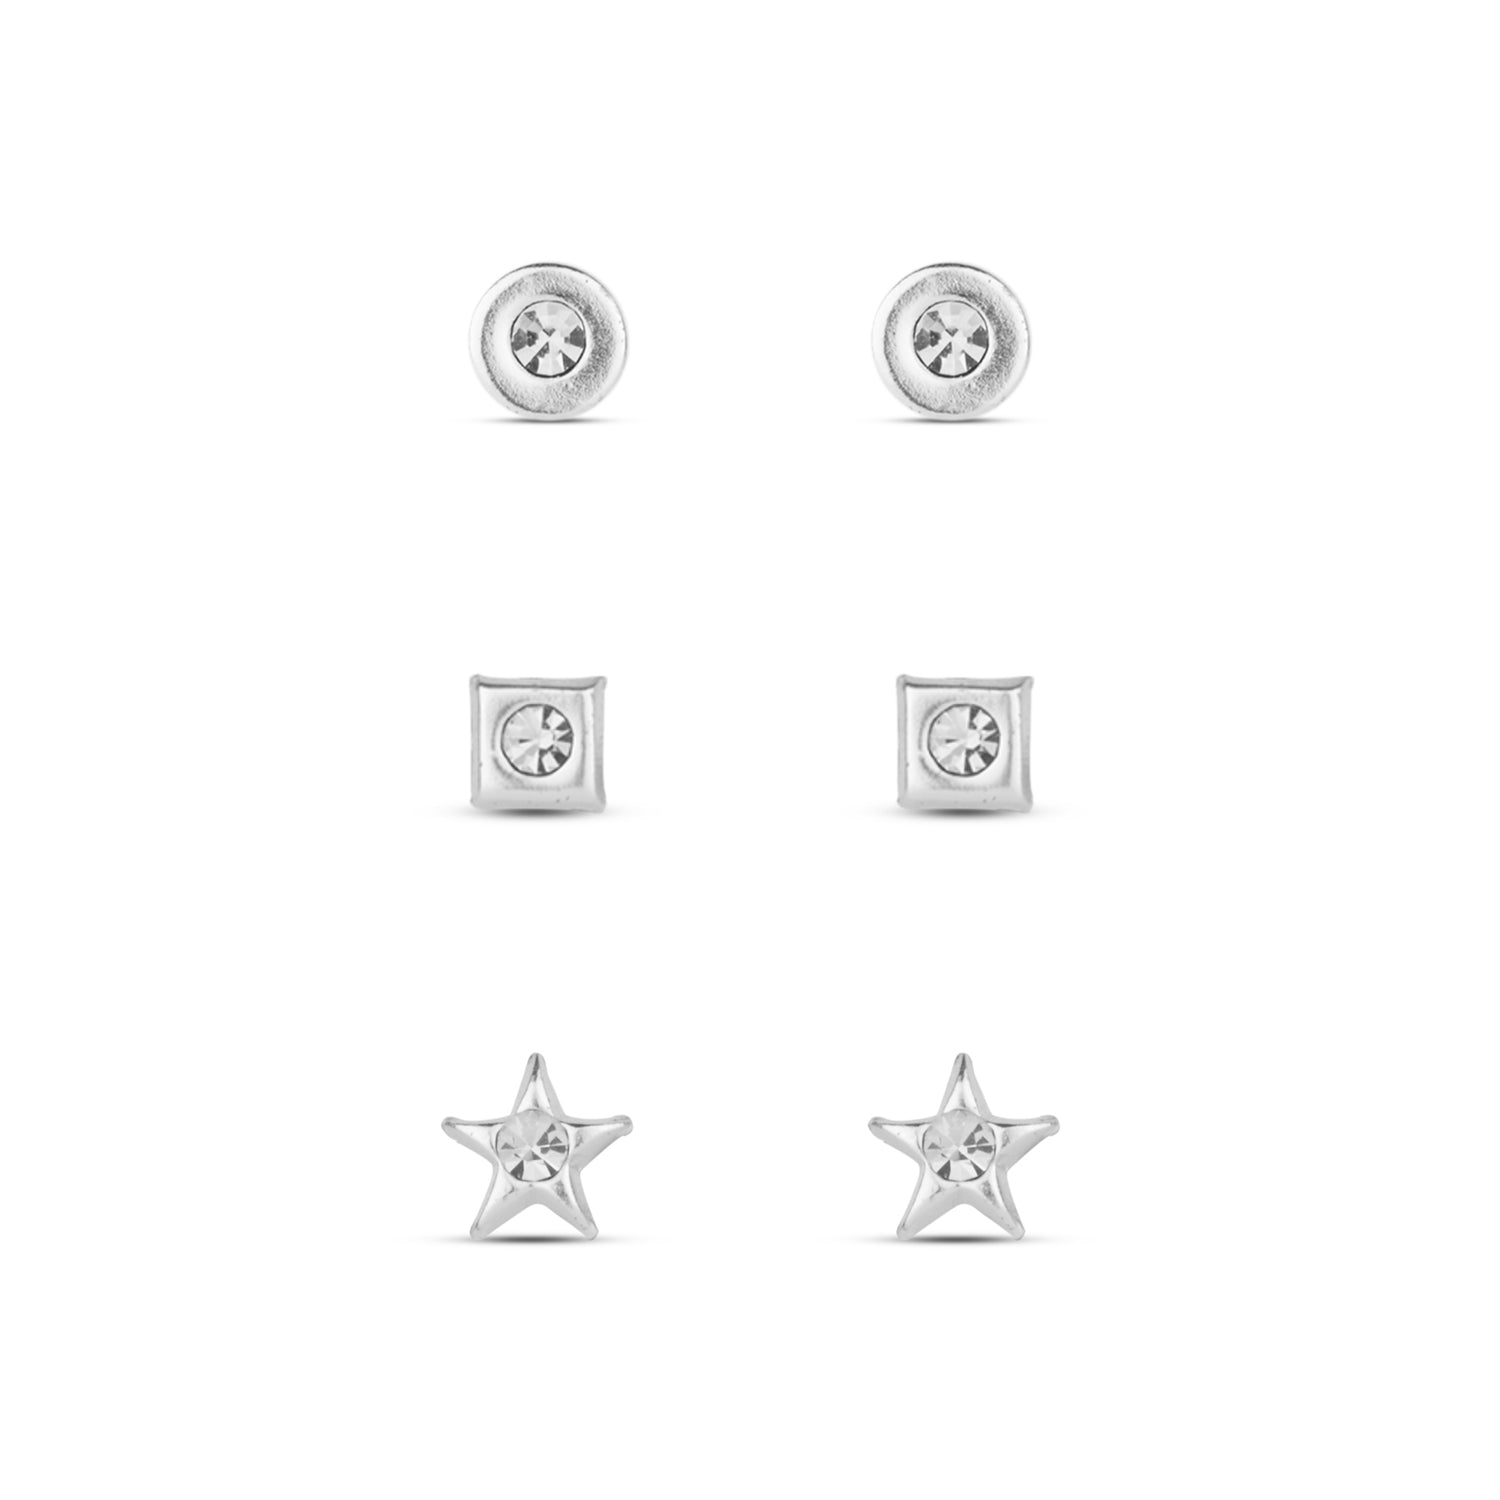 Buy Sterling Silver Cubic Zirconia Stud Earrings Set for Women Teen Girls Small  Silver Studs Ear Rings by DreamSter (4 Pairs Sterling Silver CZ Stud  Earrings) Online at Lowest Price Ever in